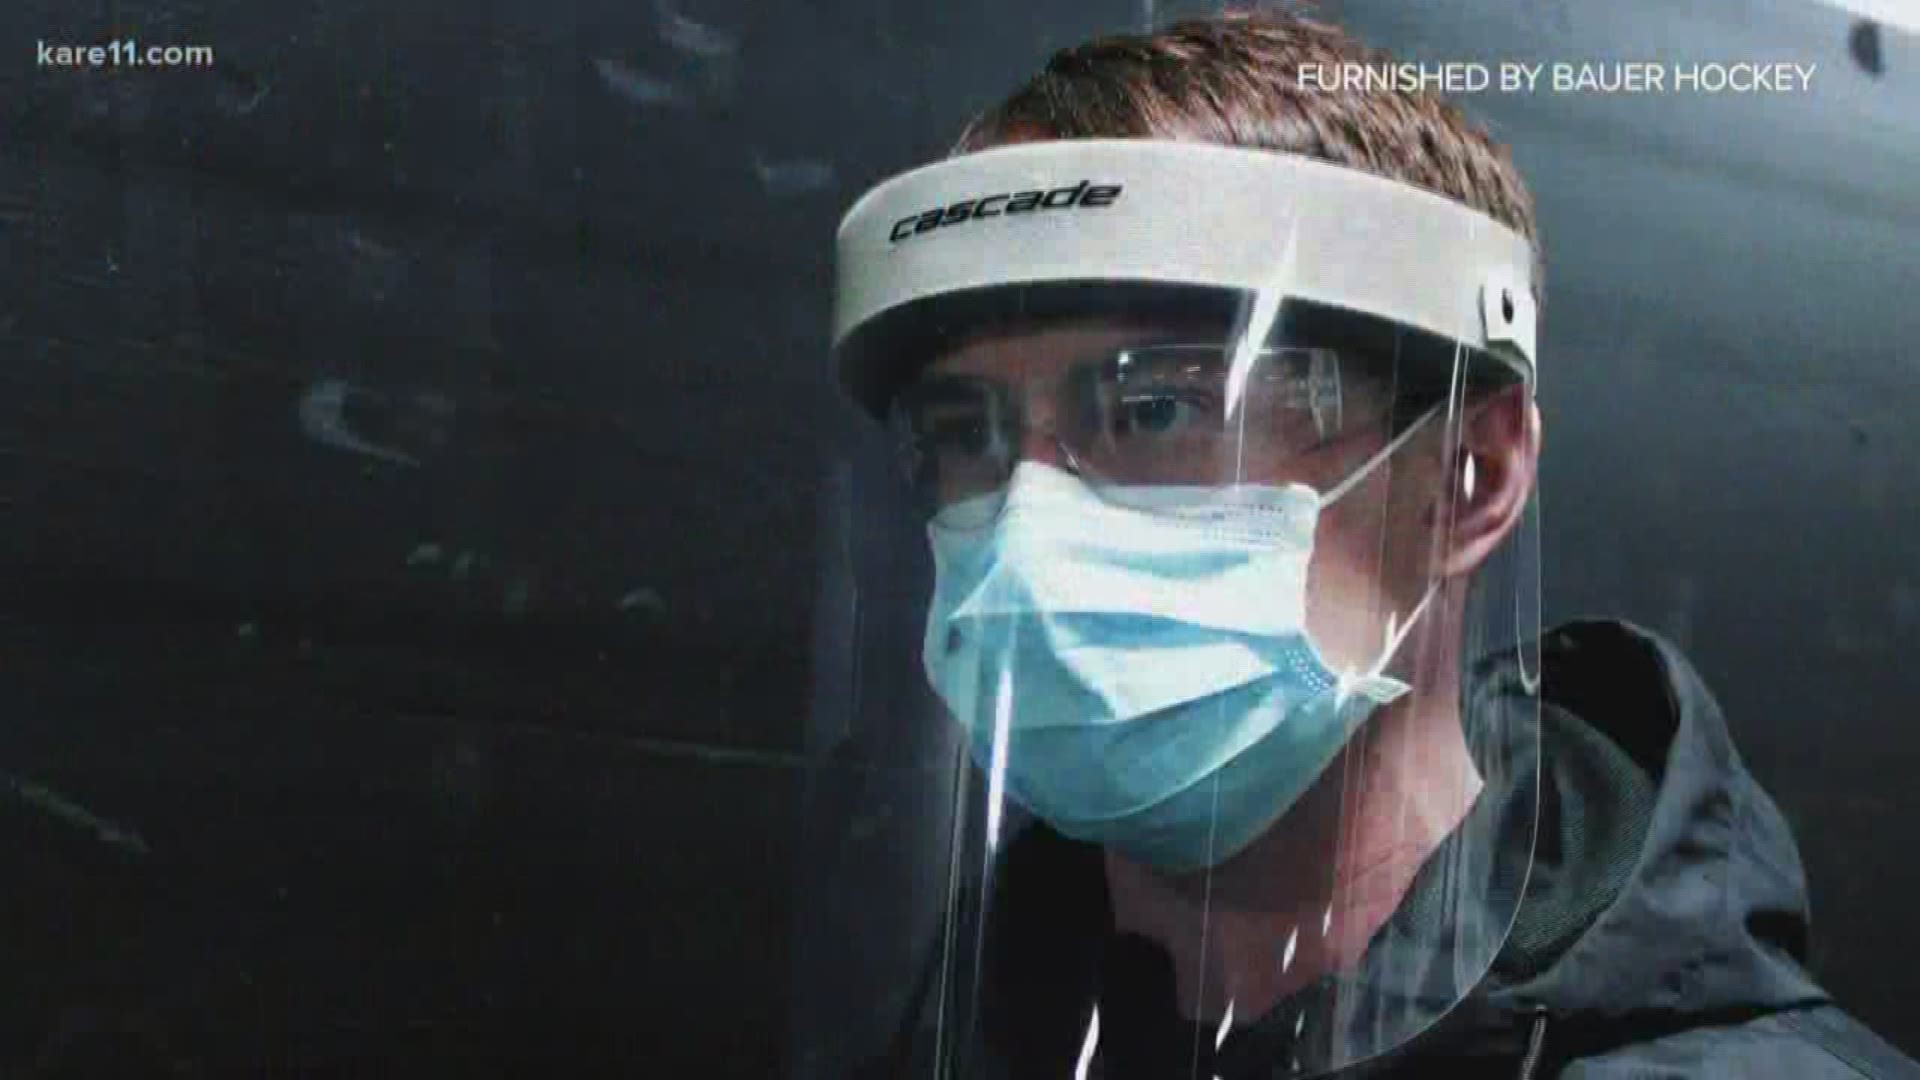 Bauer pivoted, going from protecting the faces of hockey players to health professionals.